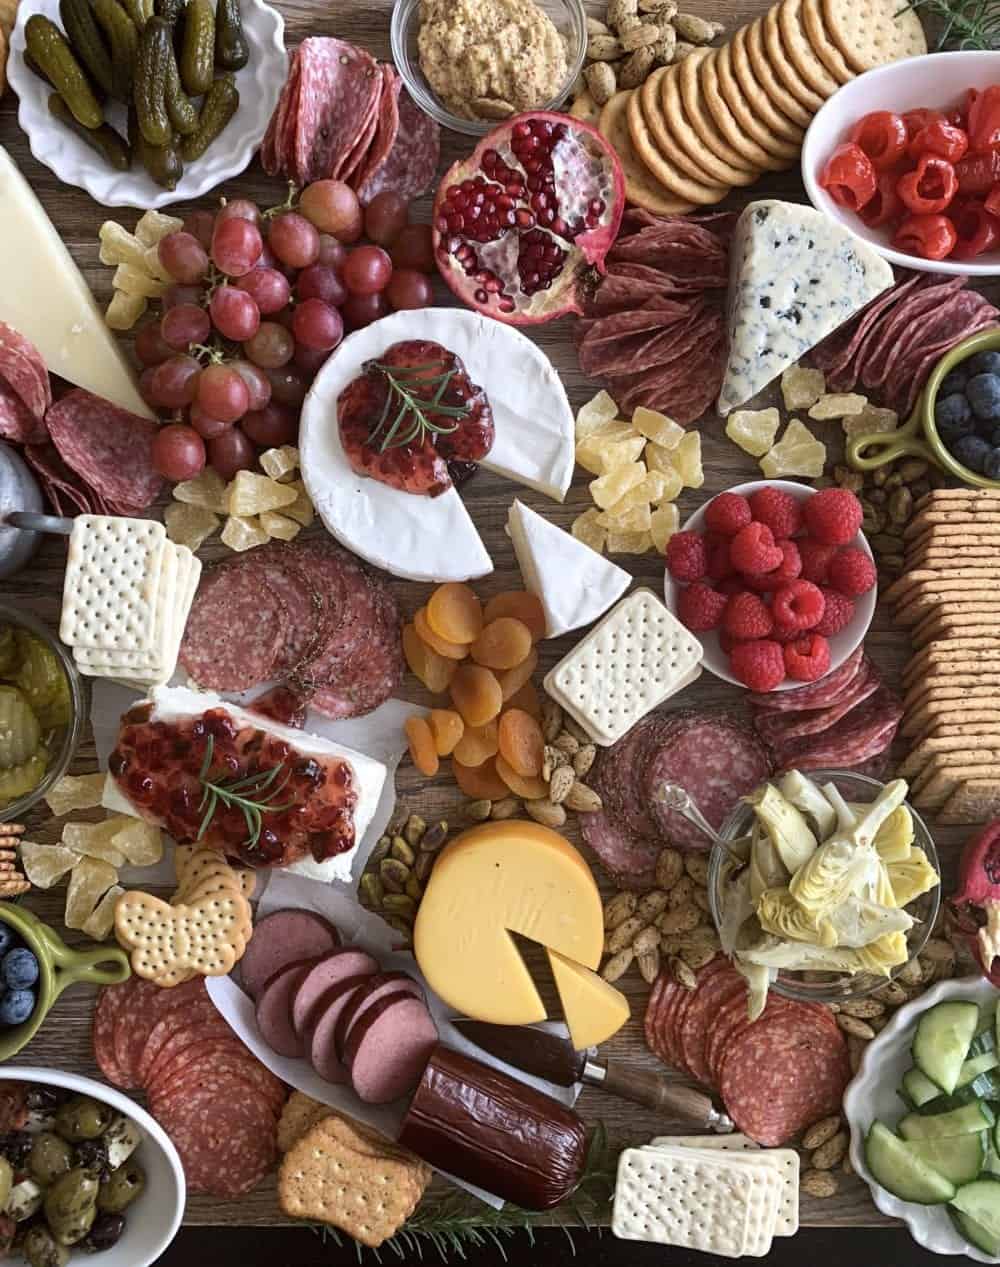 How To Make the Perfect Charcuterie Board